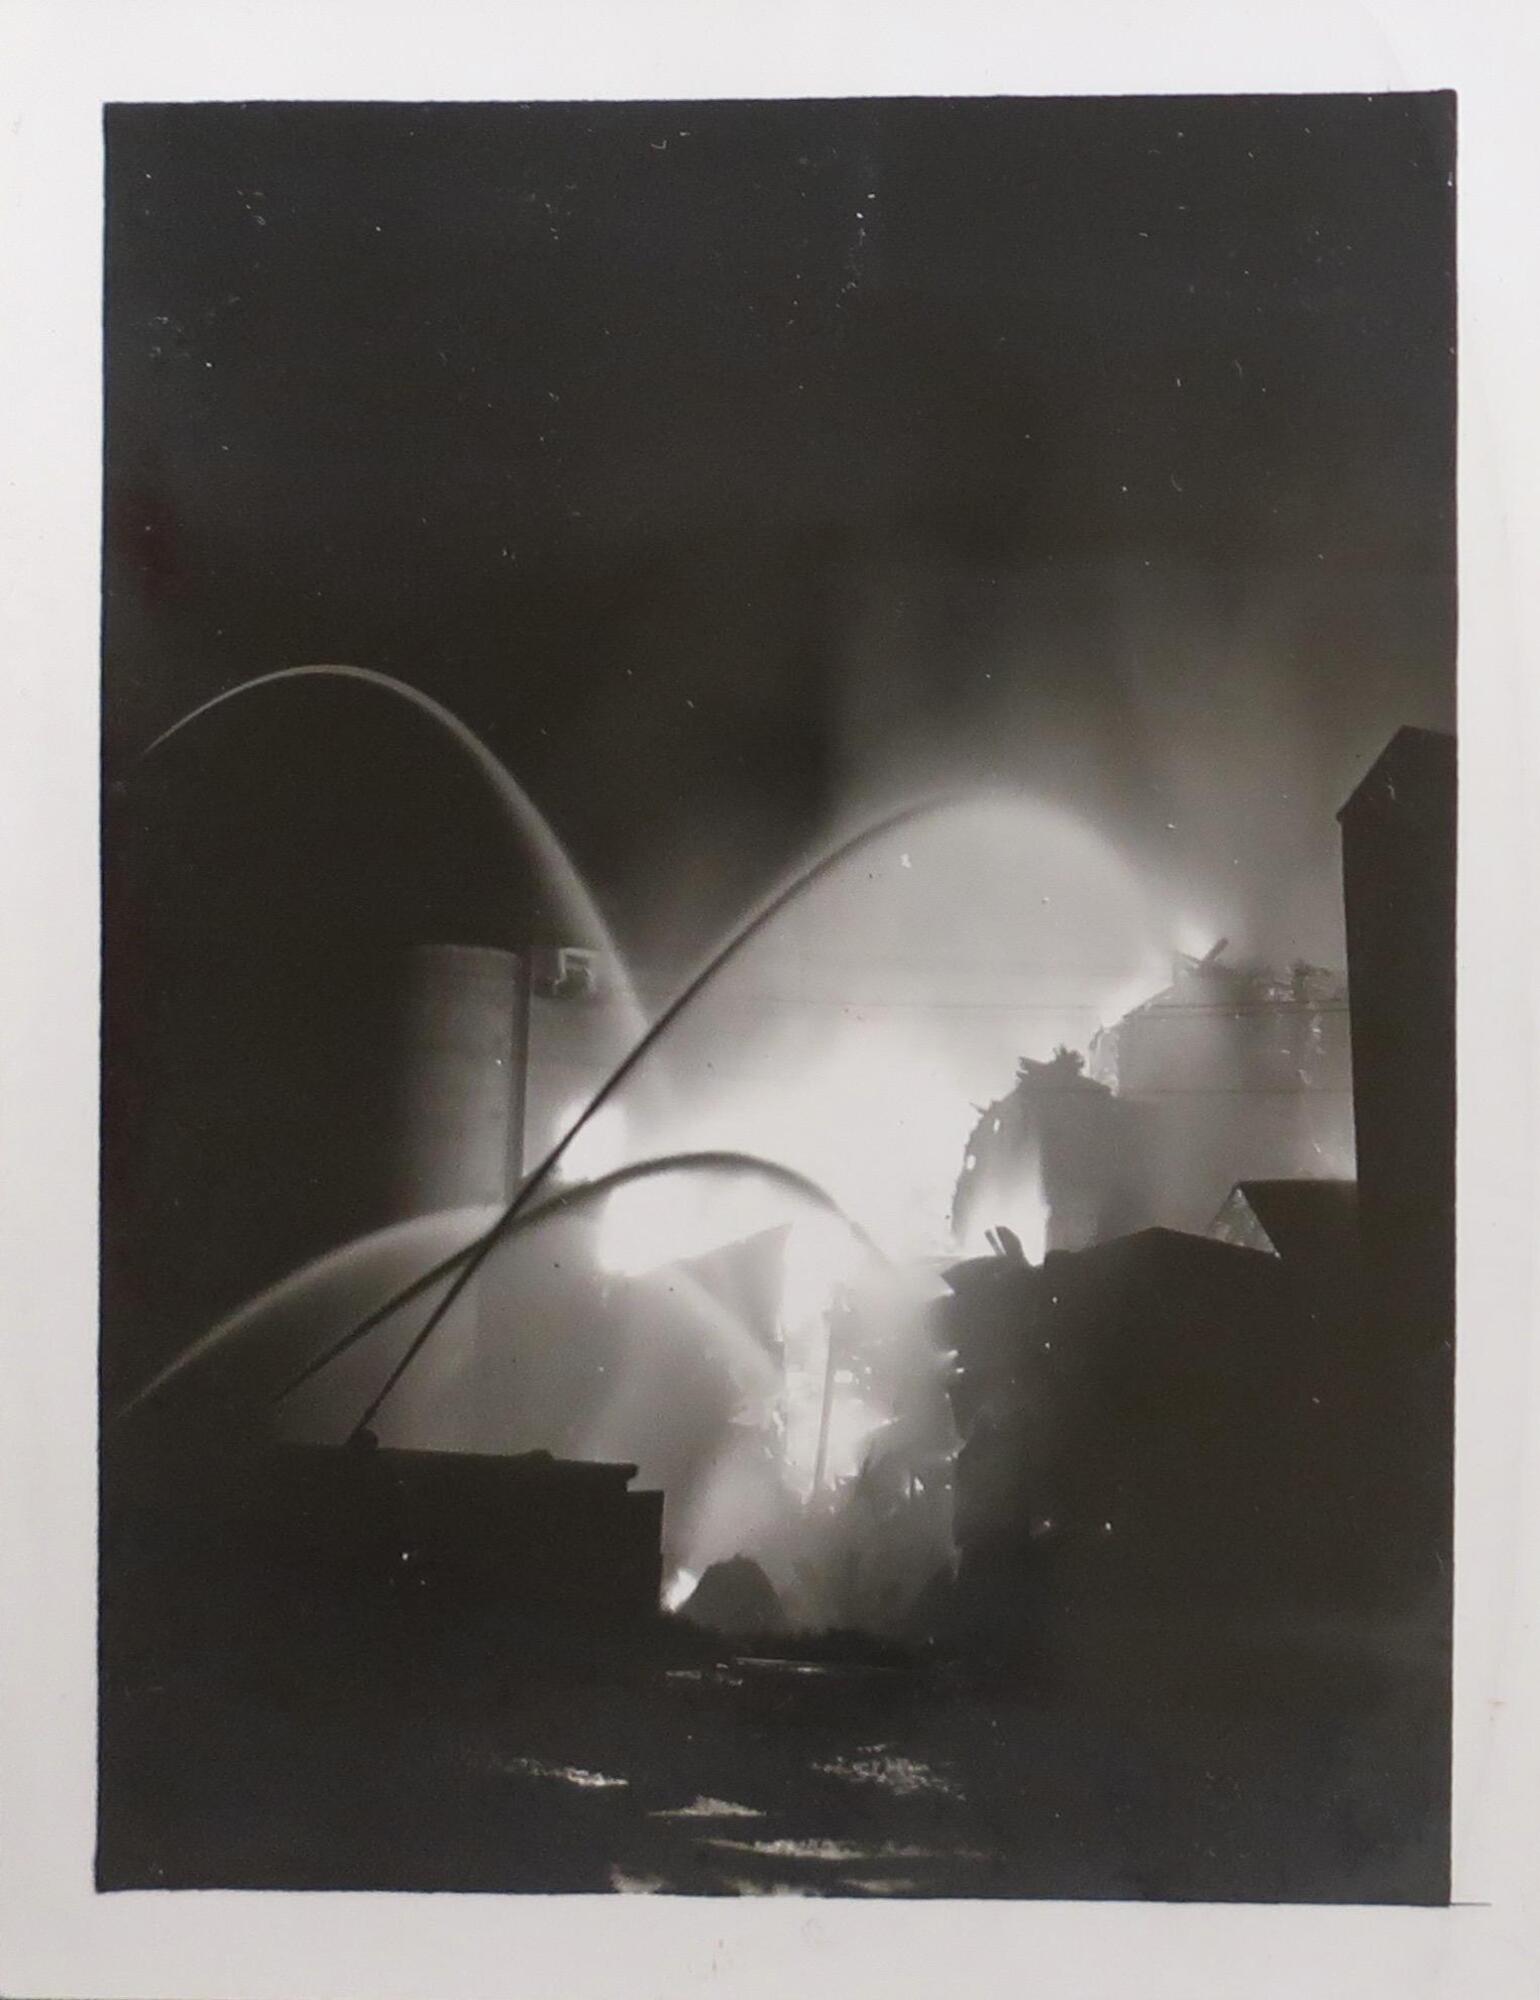 A burning building viewed from a distance. Four large jets of water arc towards the center from the left side of the image. The edges of the image are dark with silhouettes of buildings on the right side.